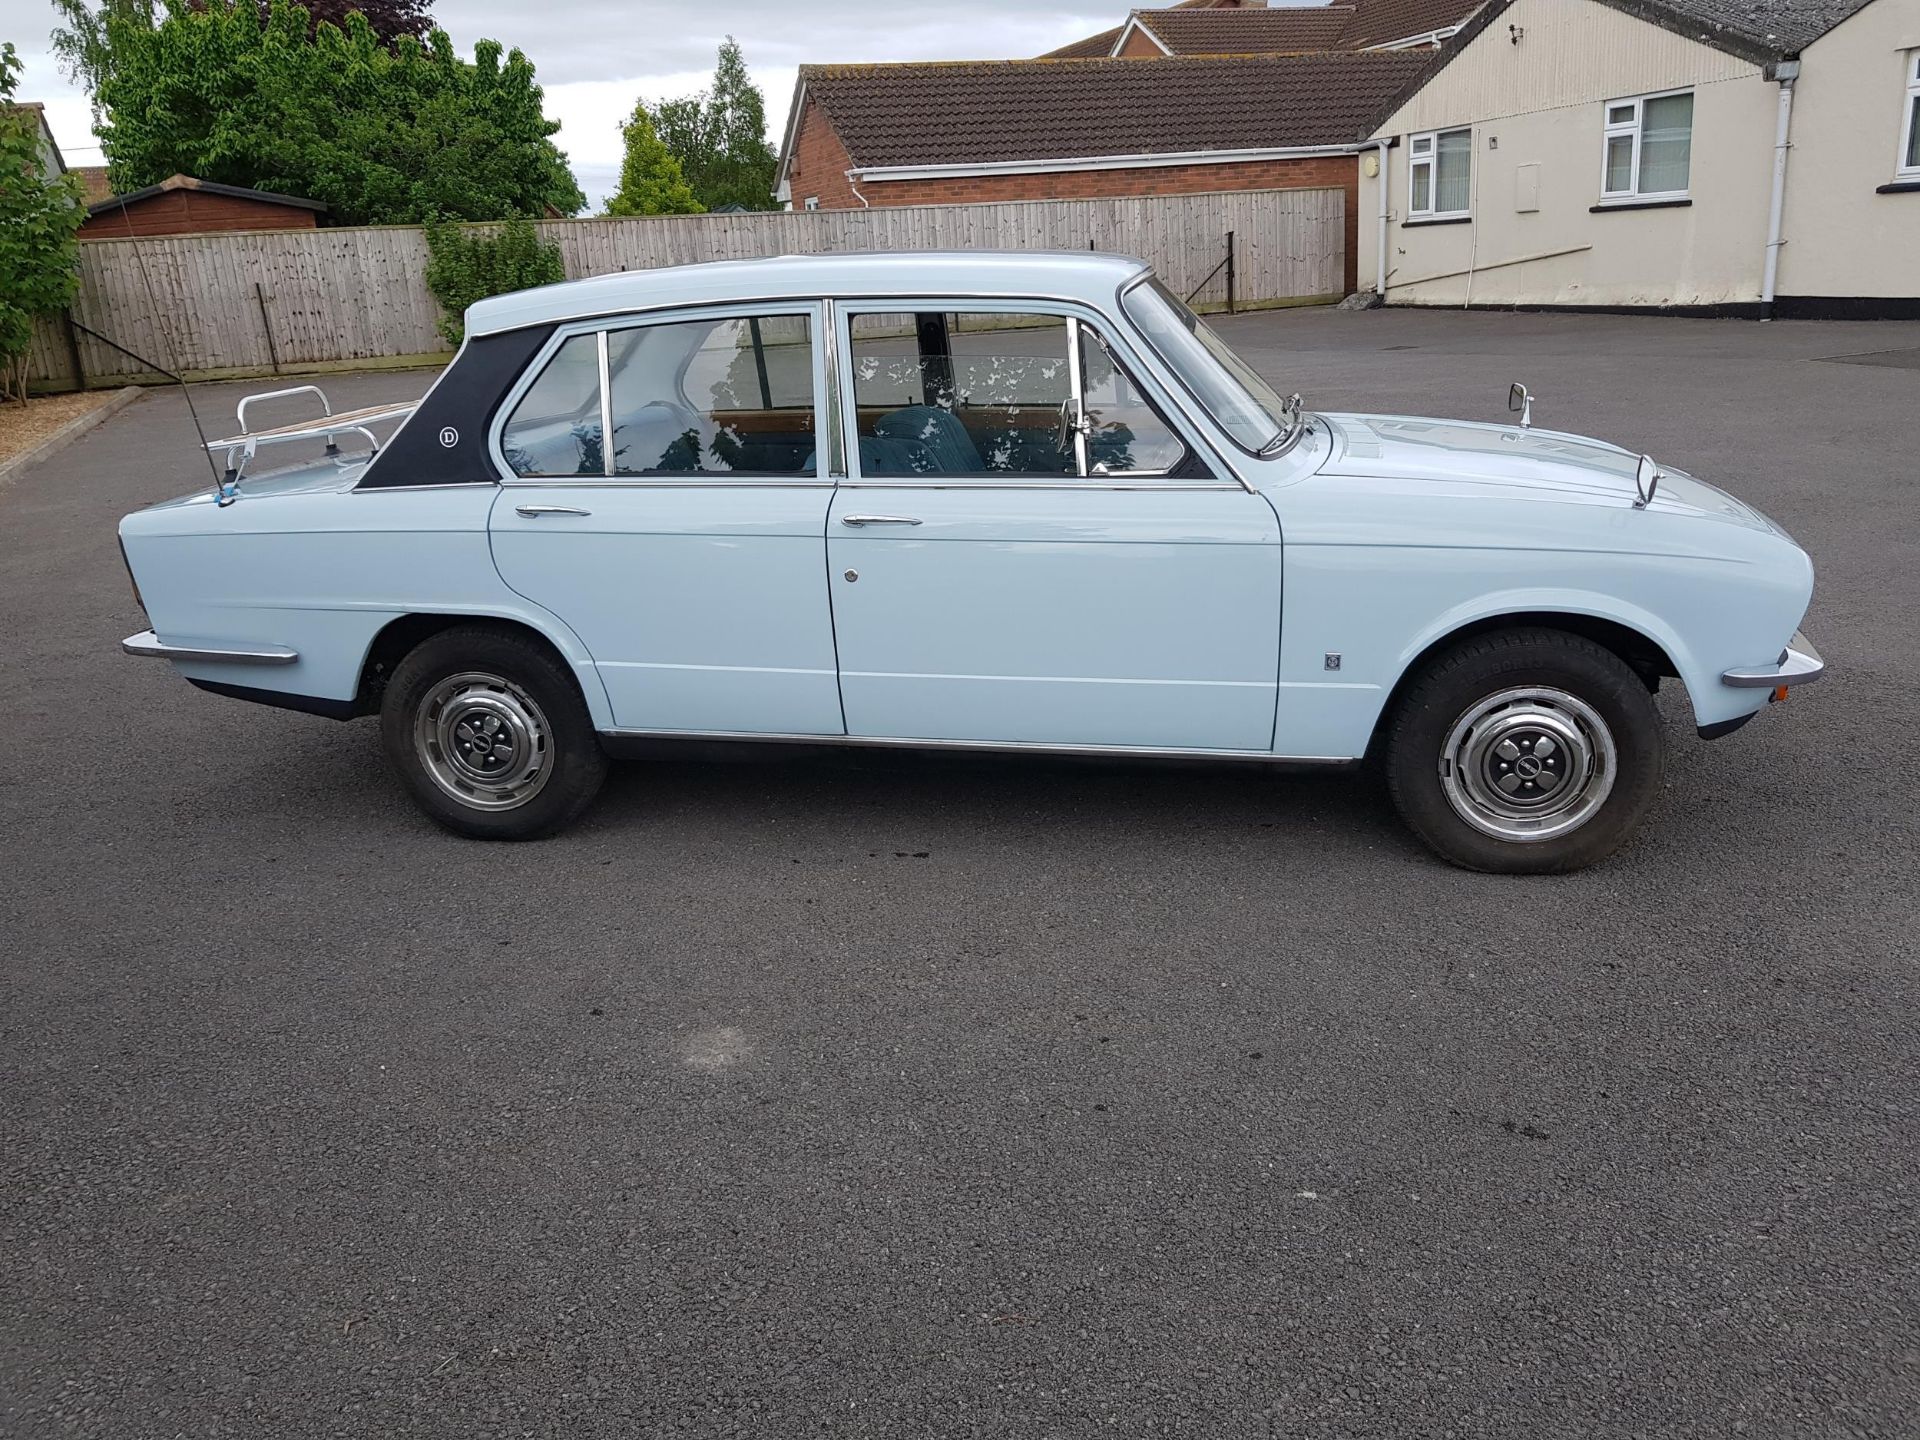 1974 Triumph Dolomite 1850 Registration number OPN 985M Light French blue with blue cloth interior - Image 3 of 14